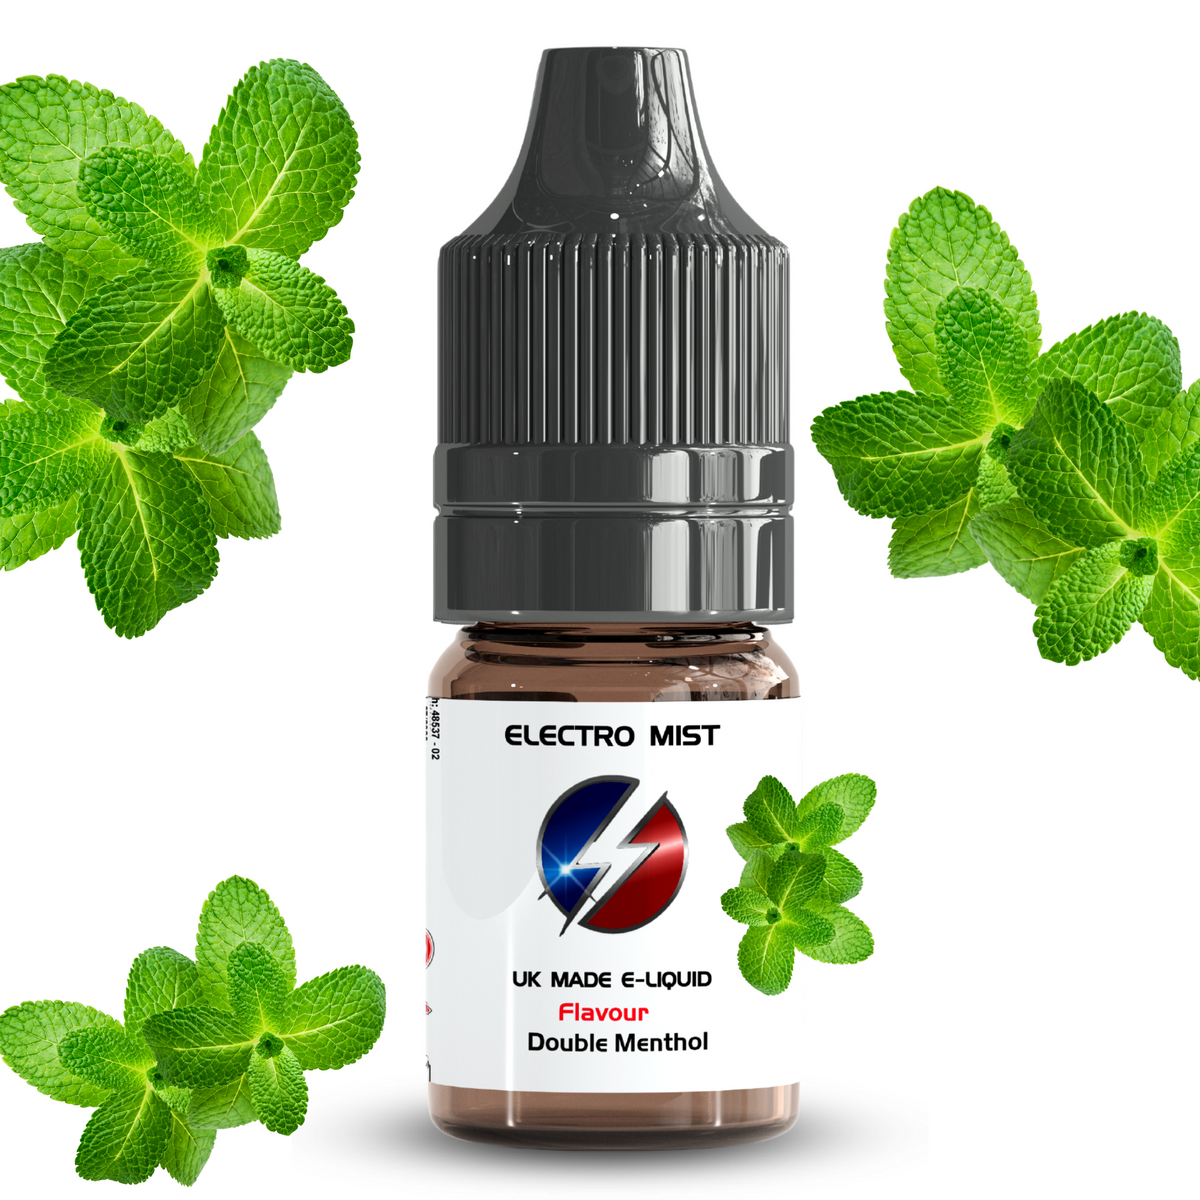 Electromist, the e-liquid brand you can trust. Get your taste buds ready for a flavour sensation, Double Menthol. Nicotine Content: 3mg/6mg/12mg. Products may contain nicotine. For over 18s Only ejuice, vape pen, eliquid, e cigarette, 10ml, vaping, cloud, PG, VG, 60/40, vape liquid, Flavour